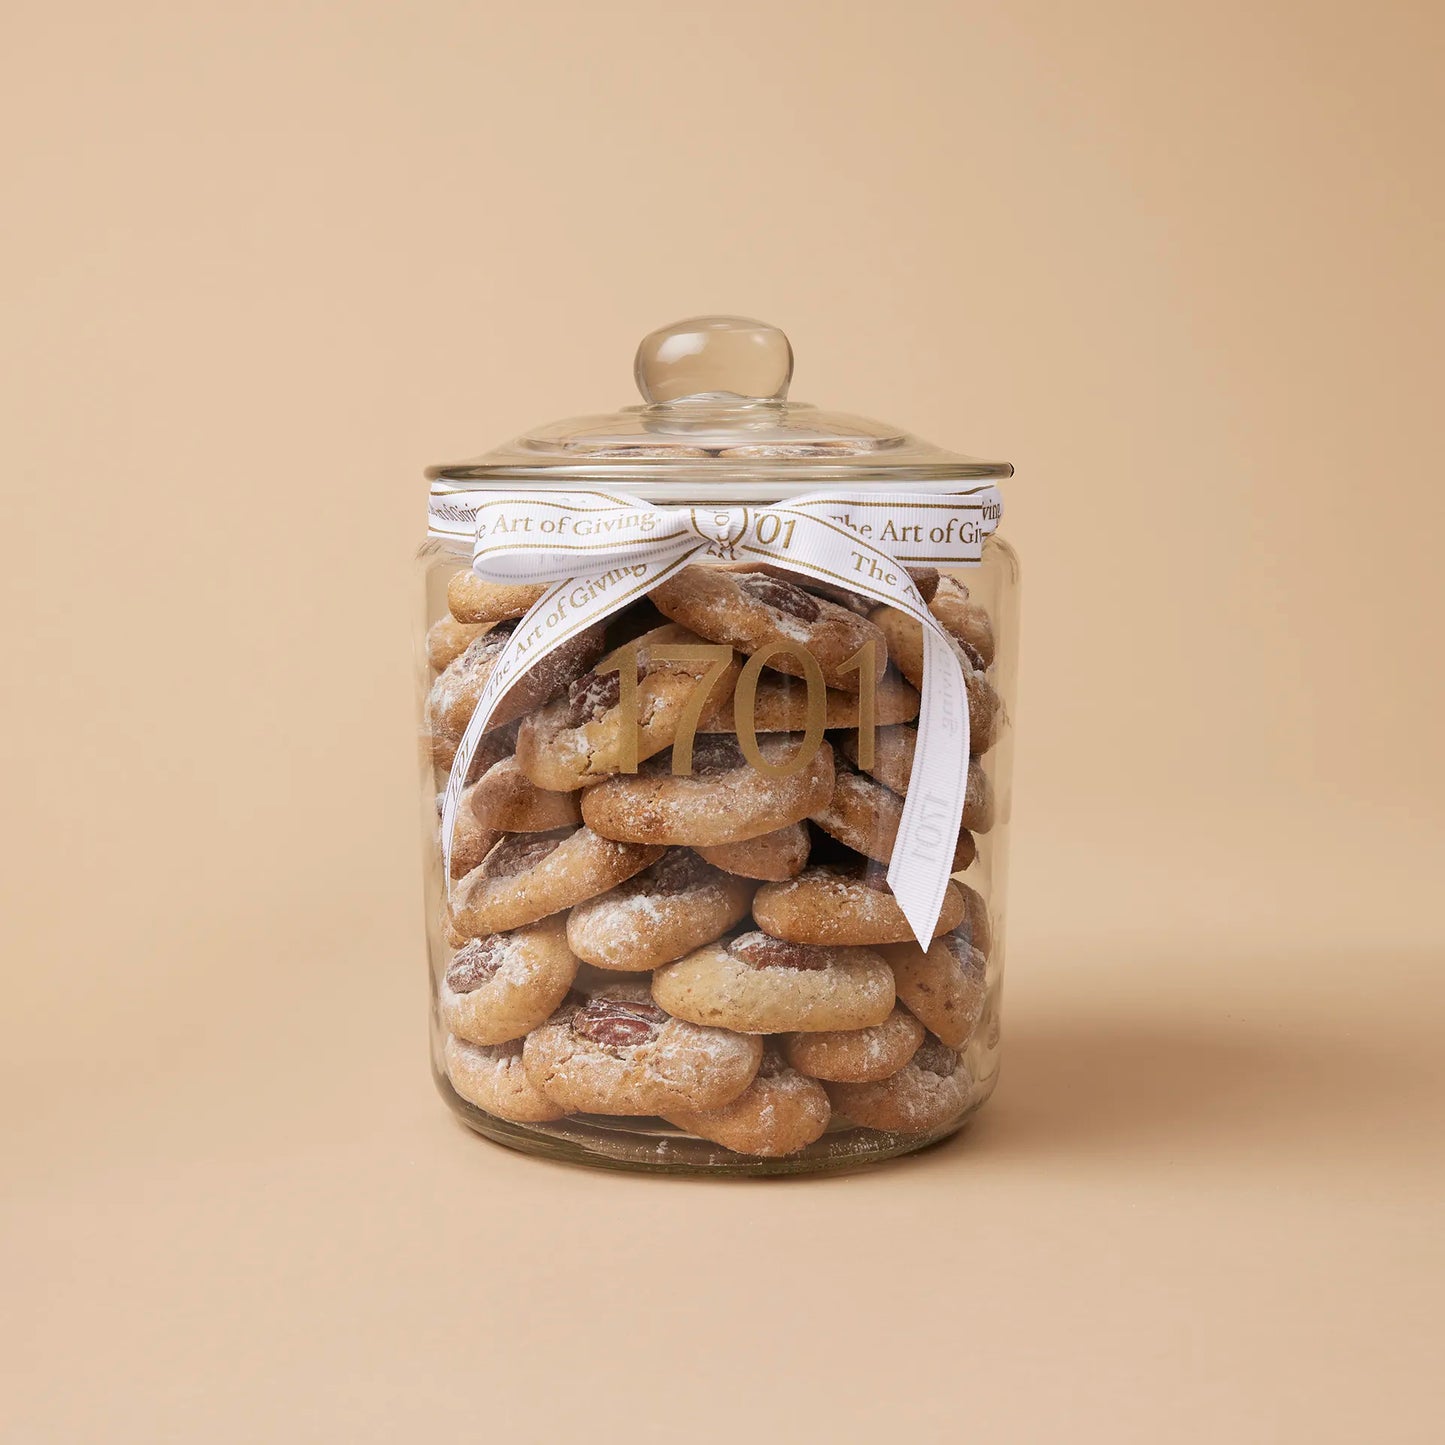 A 1kg glass jar of handmade biscuits with pecan nuts, presented in a glass jar with a hand-tied signature ribbon on a warm background, with the product label visible on the front of the jar. The biscuits are SANHA Halaal approved, making them a perfect gift idea for anyone who appreciates high-quality biscuits made with care.